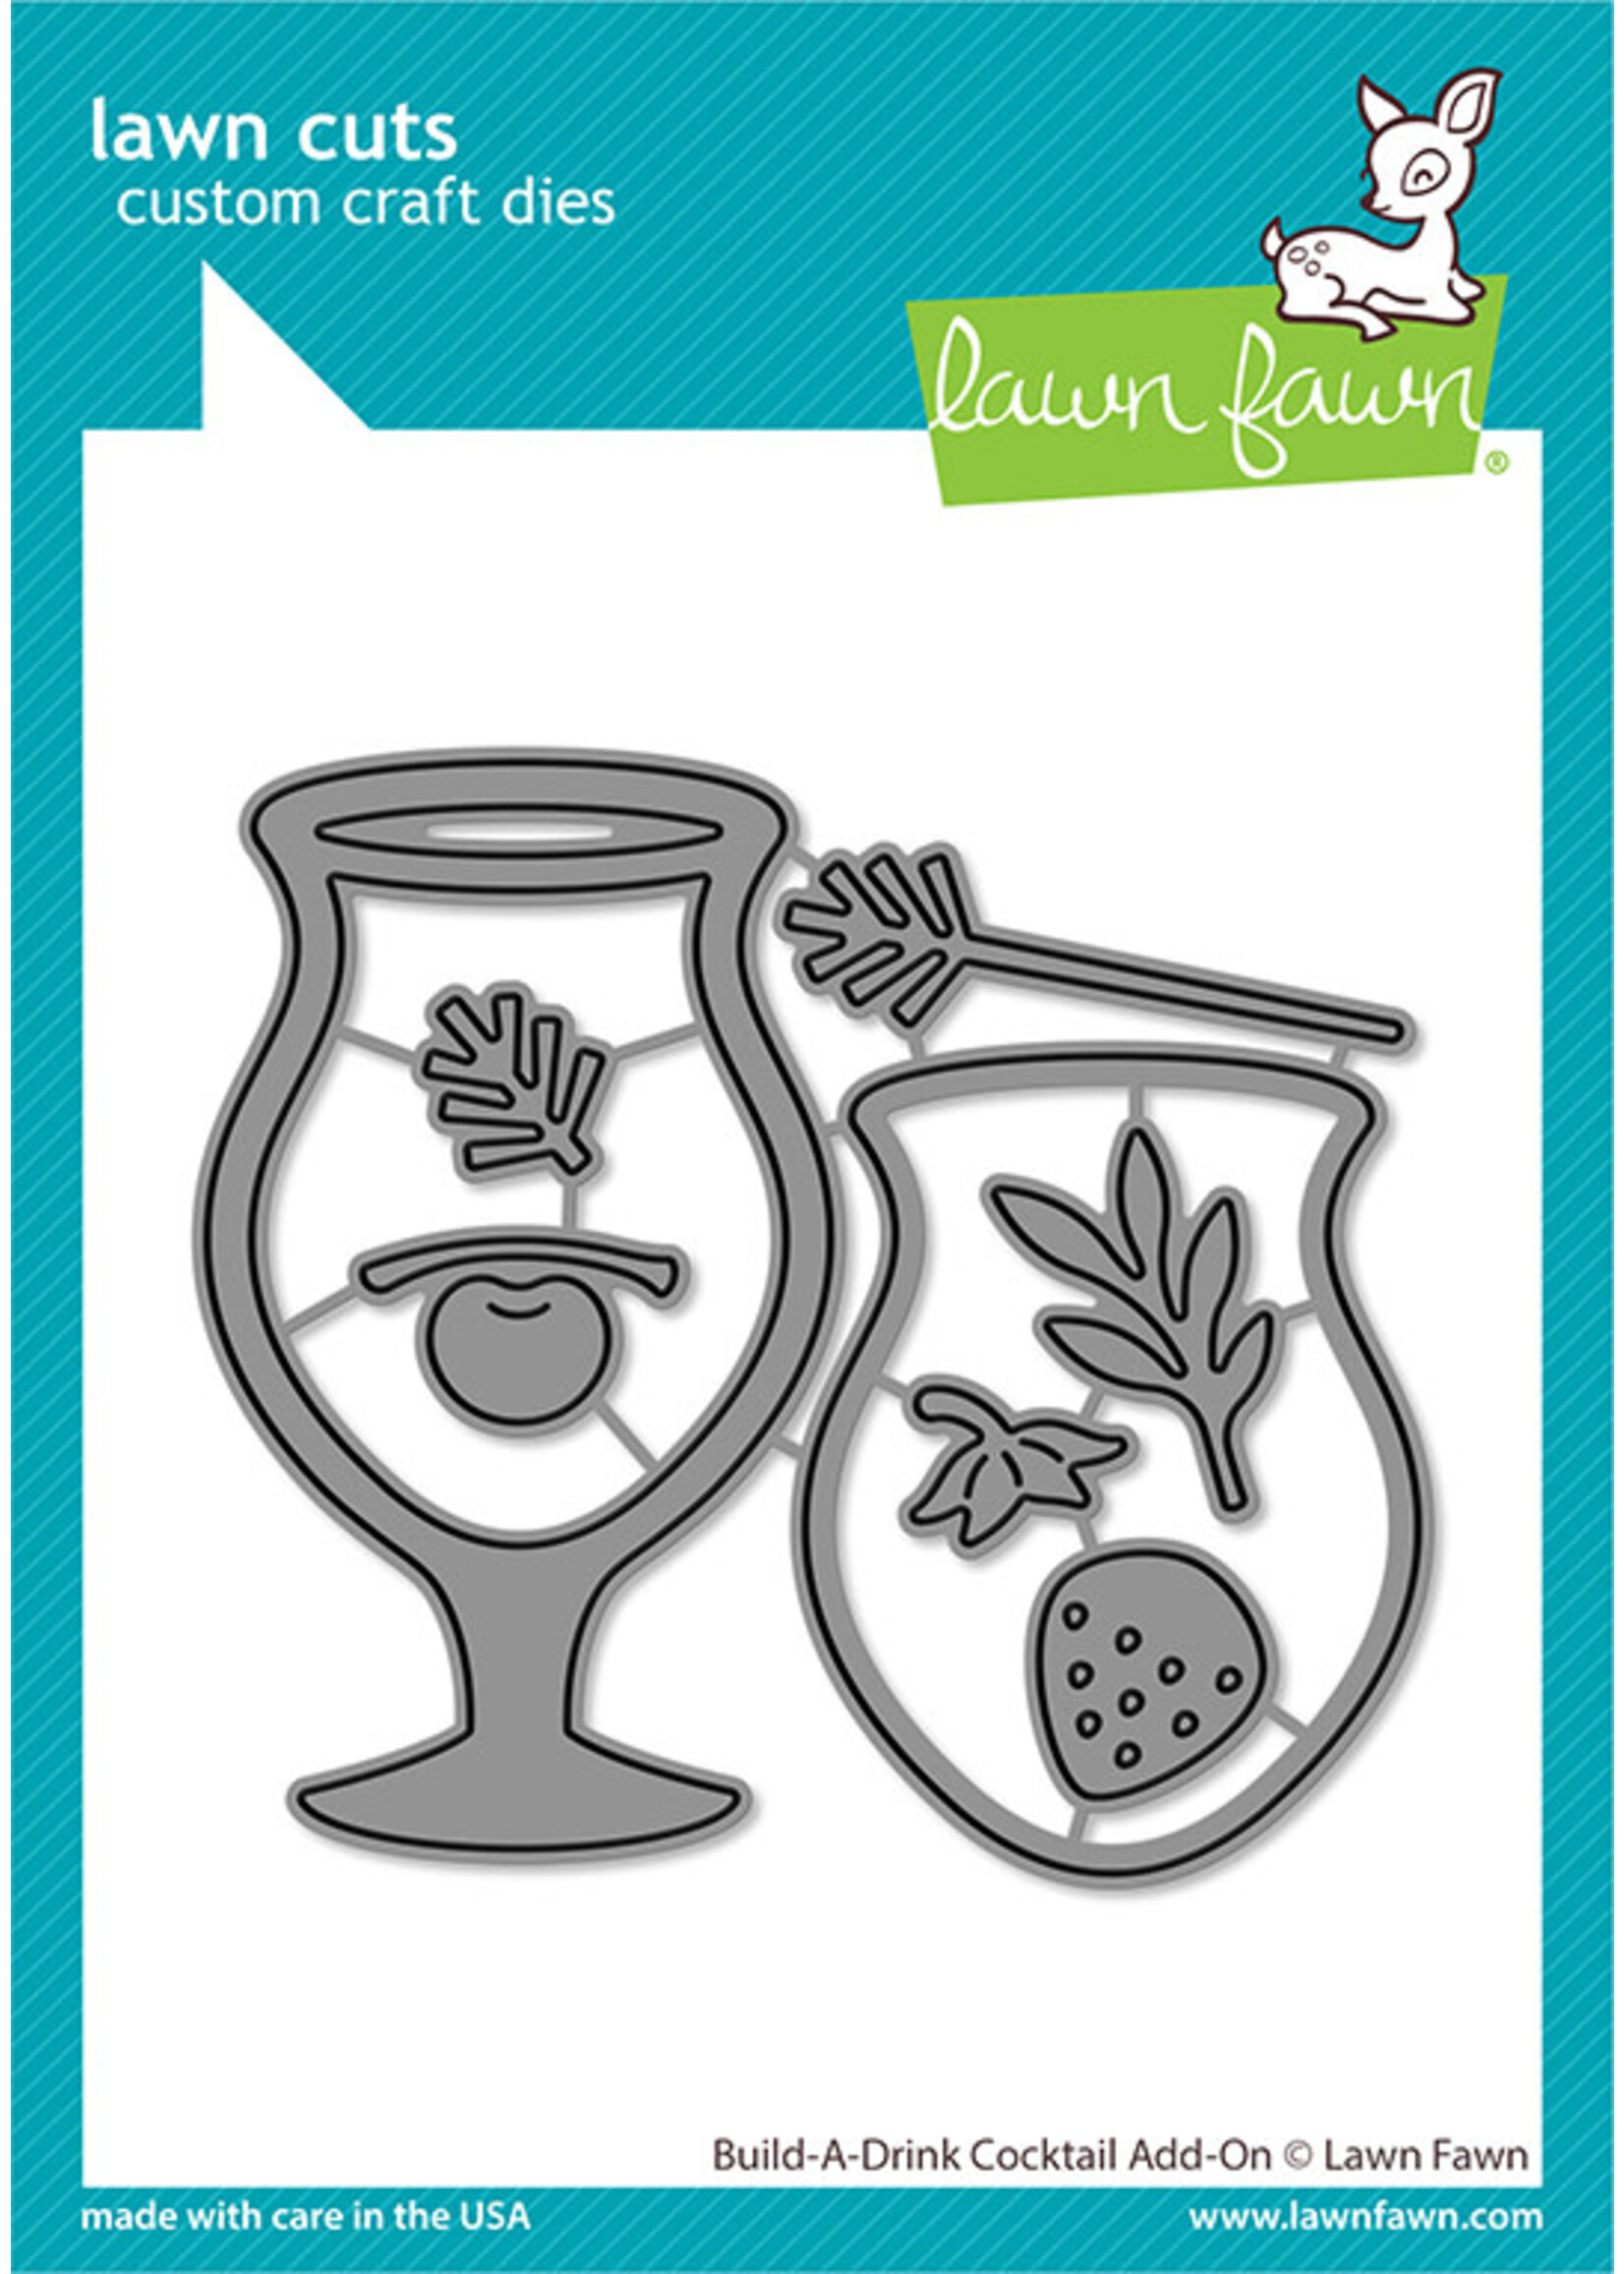 Lawn Fawn build-a-drink cocktail add-on dies